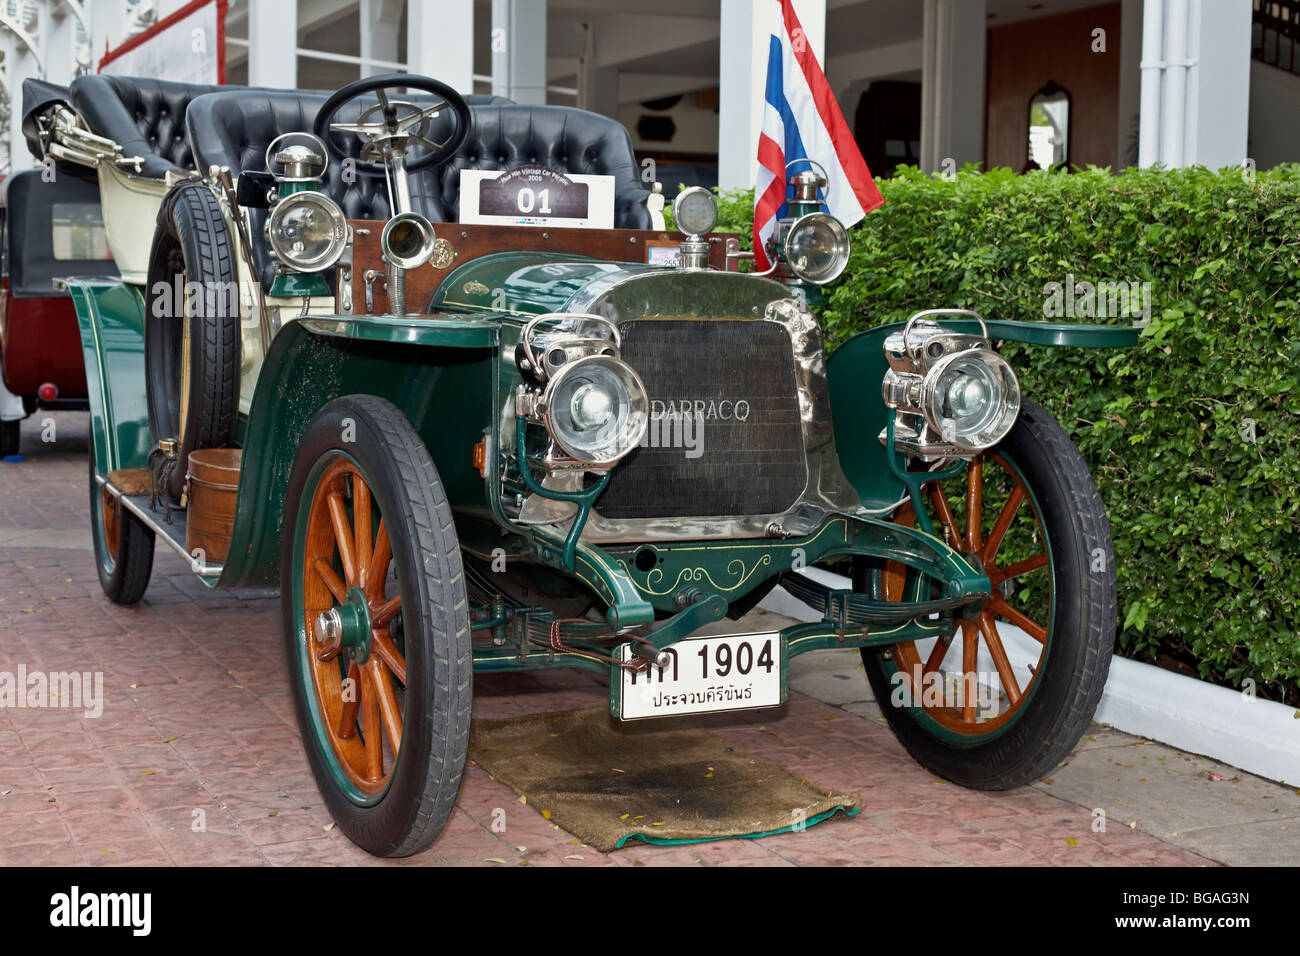 1904 French Darracq Veteran classic car and appropriate license plate Stock Photo